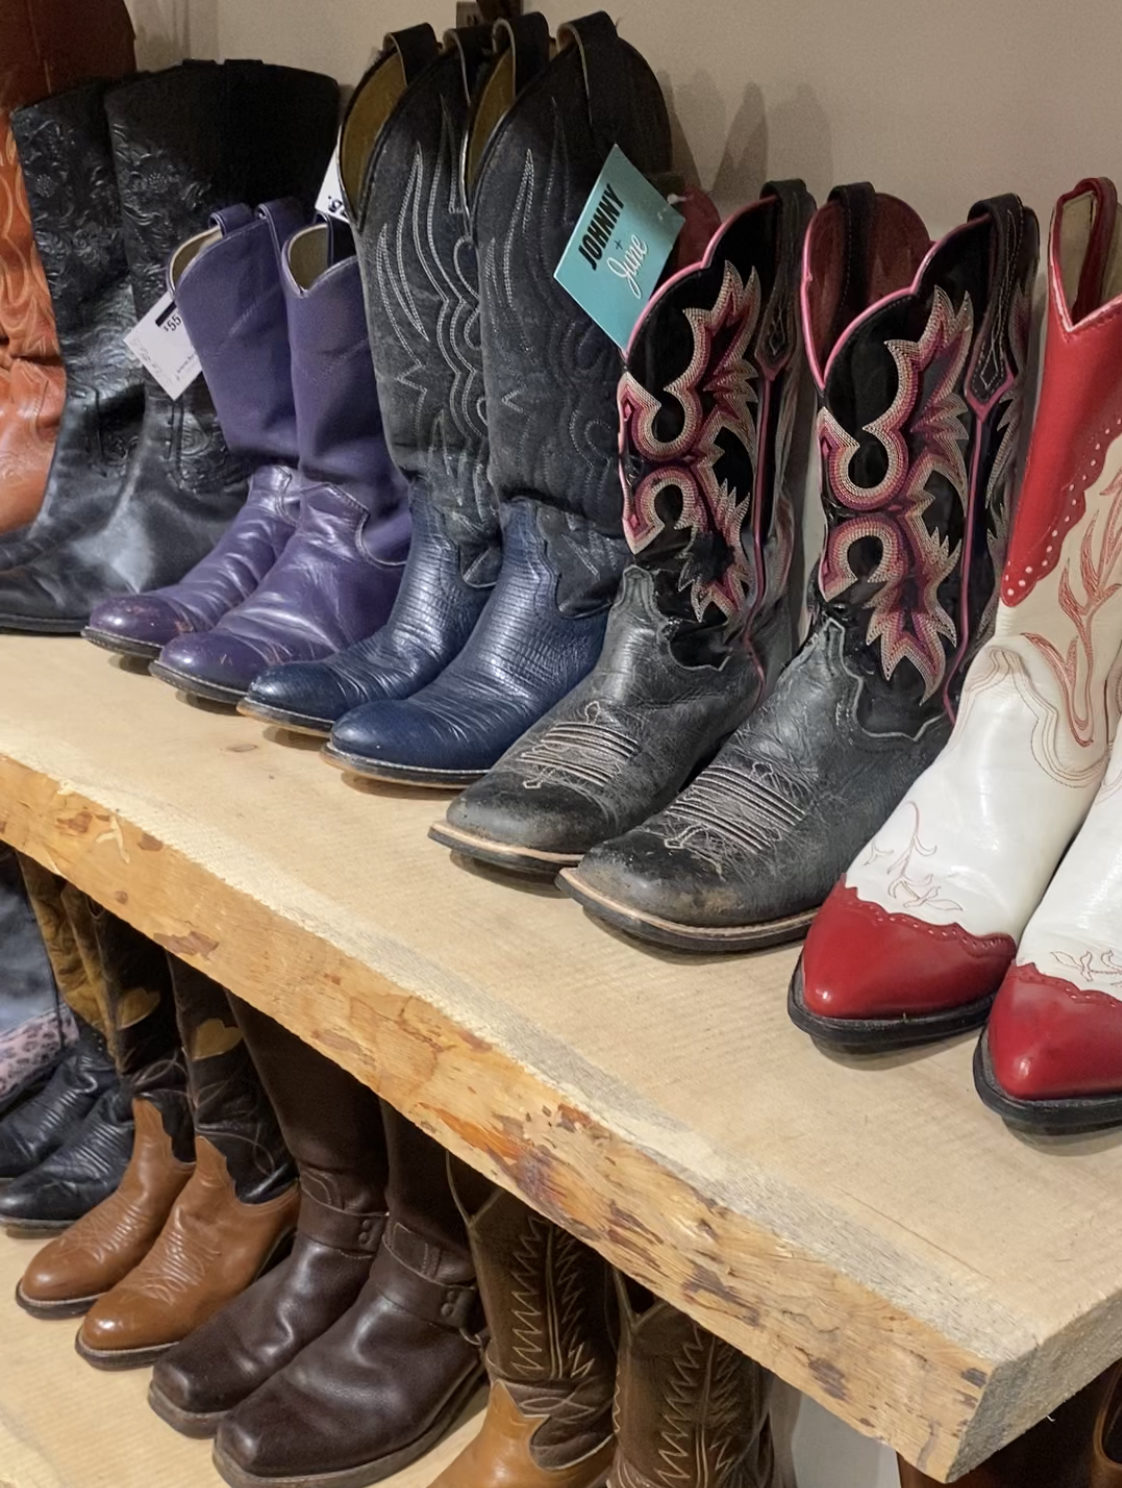 Boots on boots at Head West (24 W Main St, Bozeman)